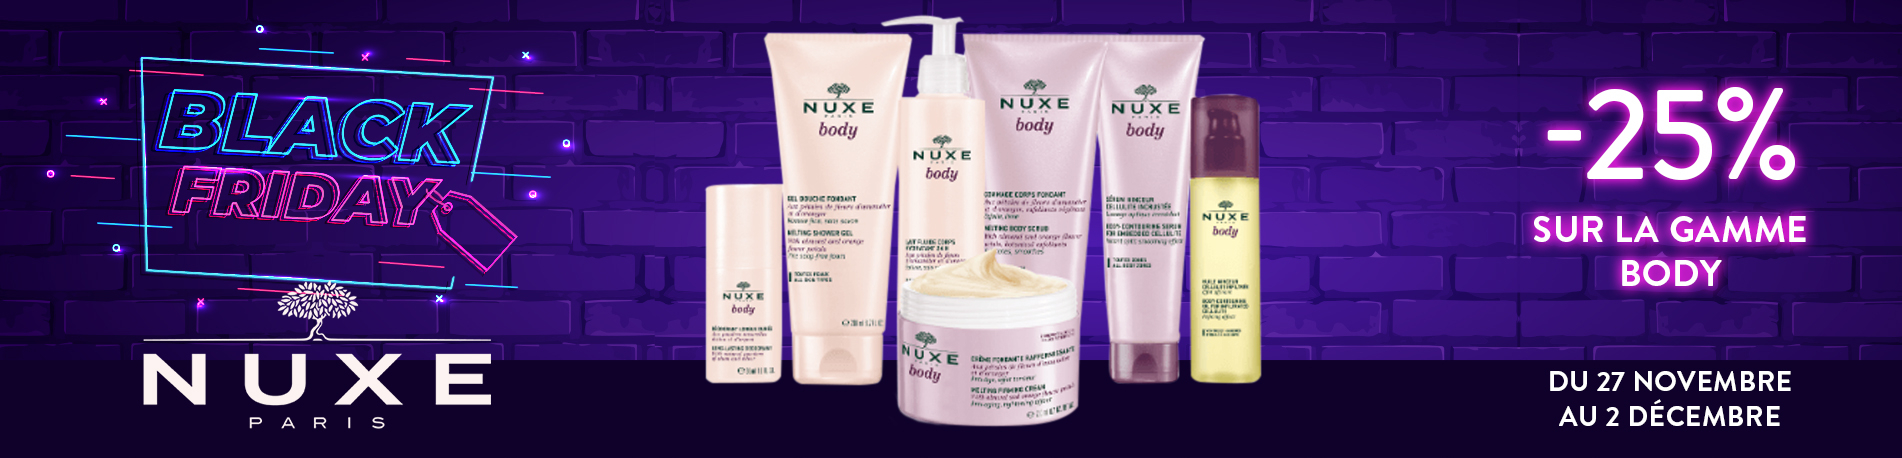 Promotion Black friday Nuxe Body